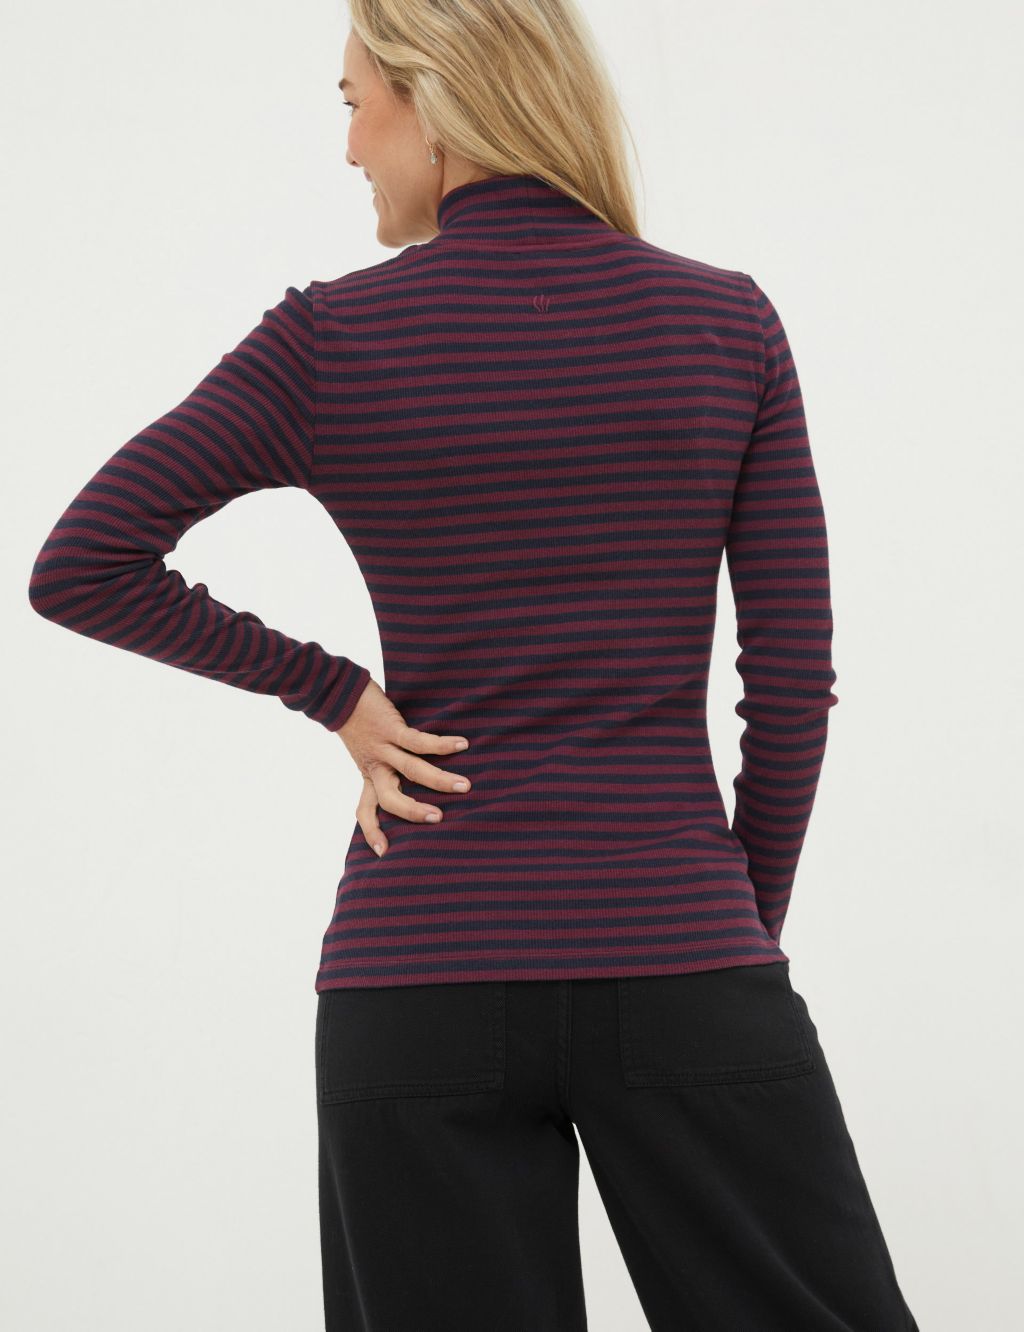 Modal Blend Striped Ribbed Top image 2